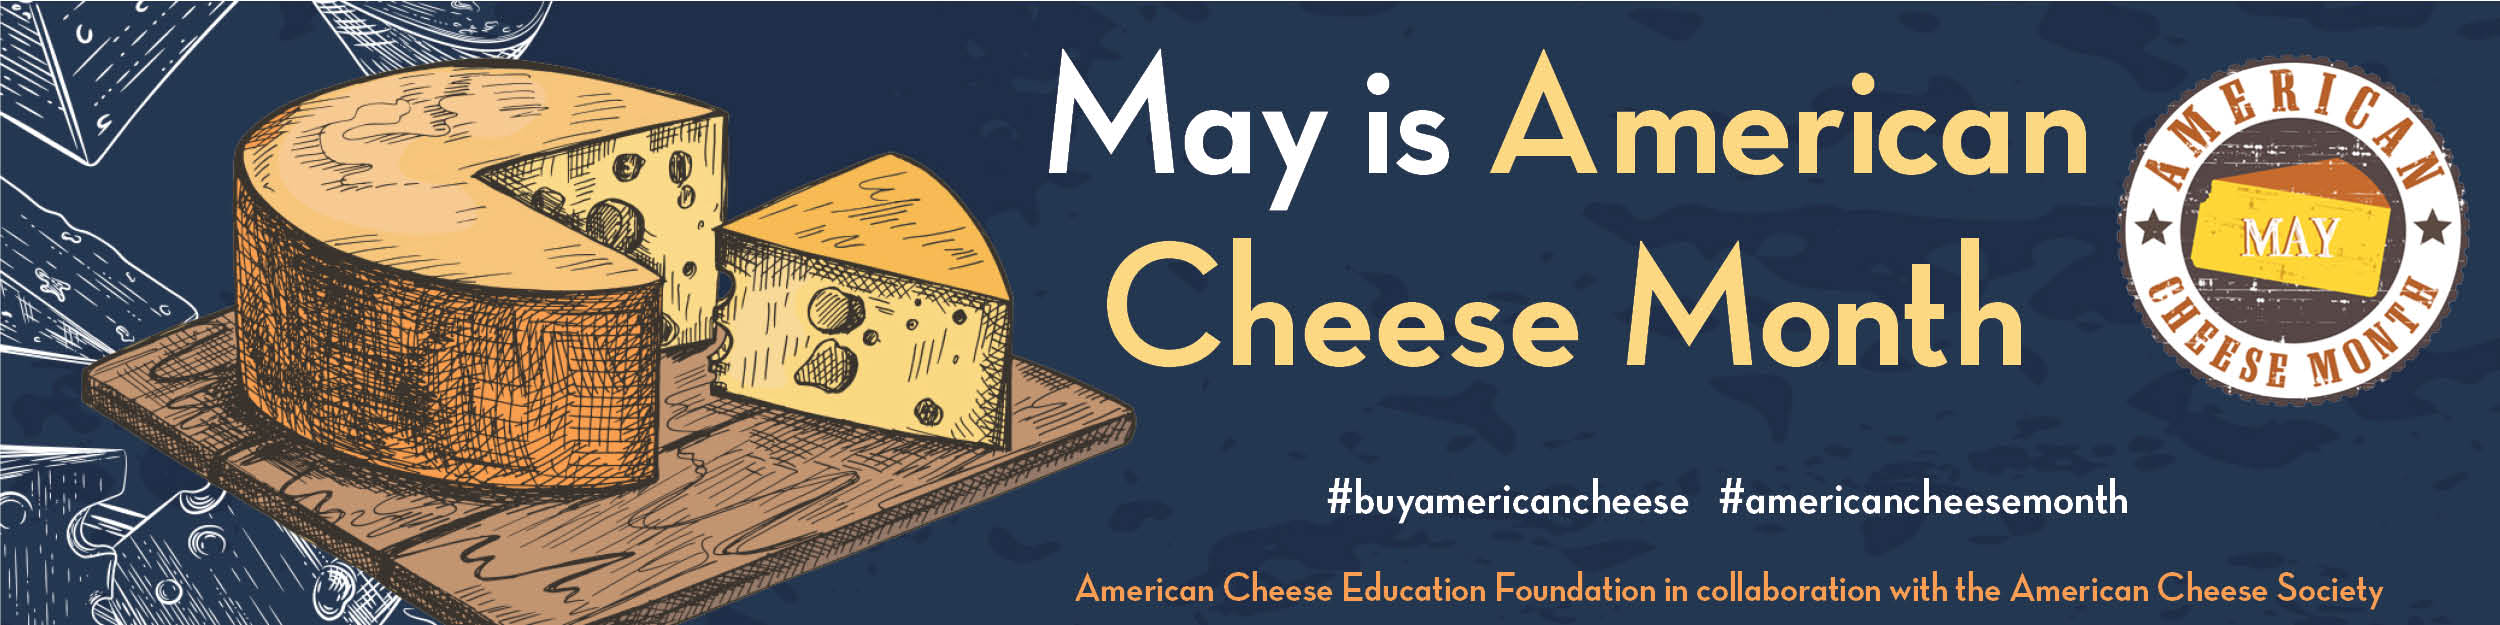 May is American Cheese Month.